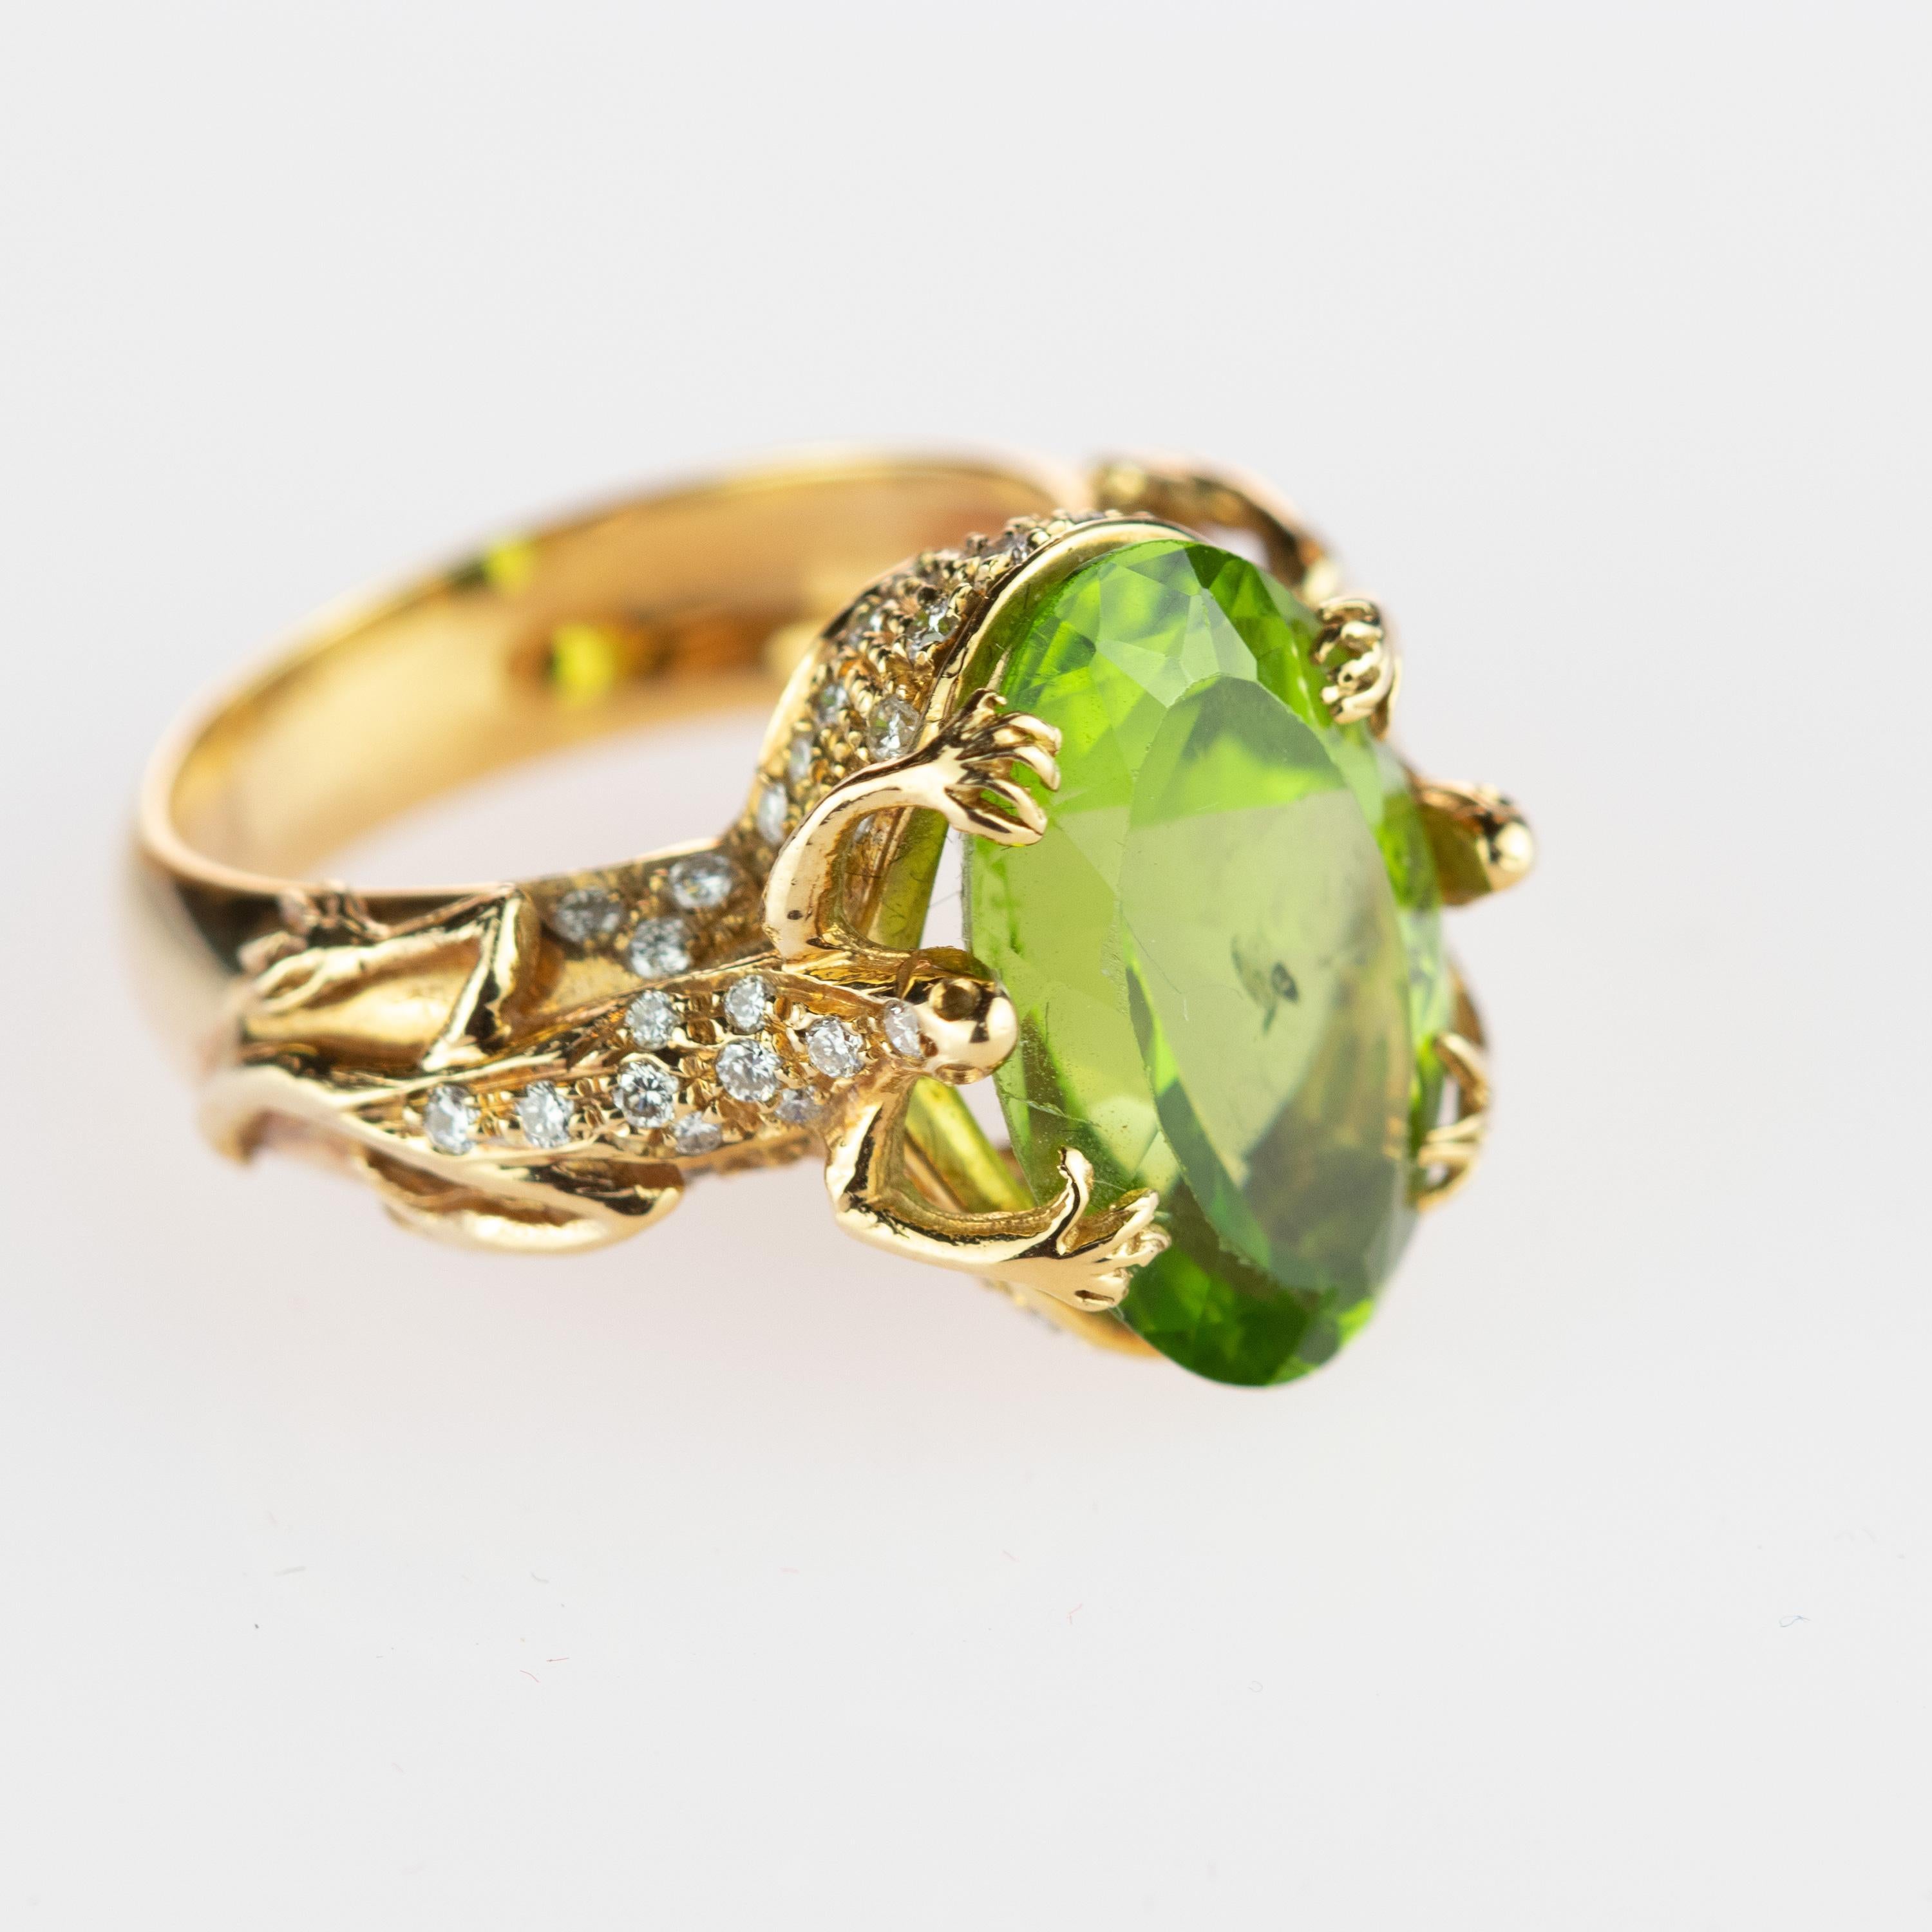 An impressive clear natural Peridot 8.8 carat gemstone surrounded on each side by mystic salamanders. Like in a natural throne the animals are composed by 0.7 carat diamonds and surrounded by 18 karat yellow gold. This epic statement ring is an